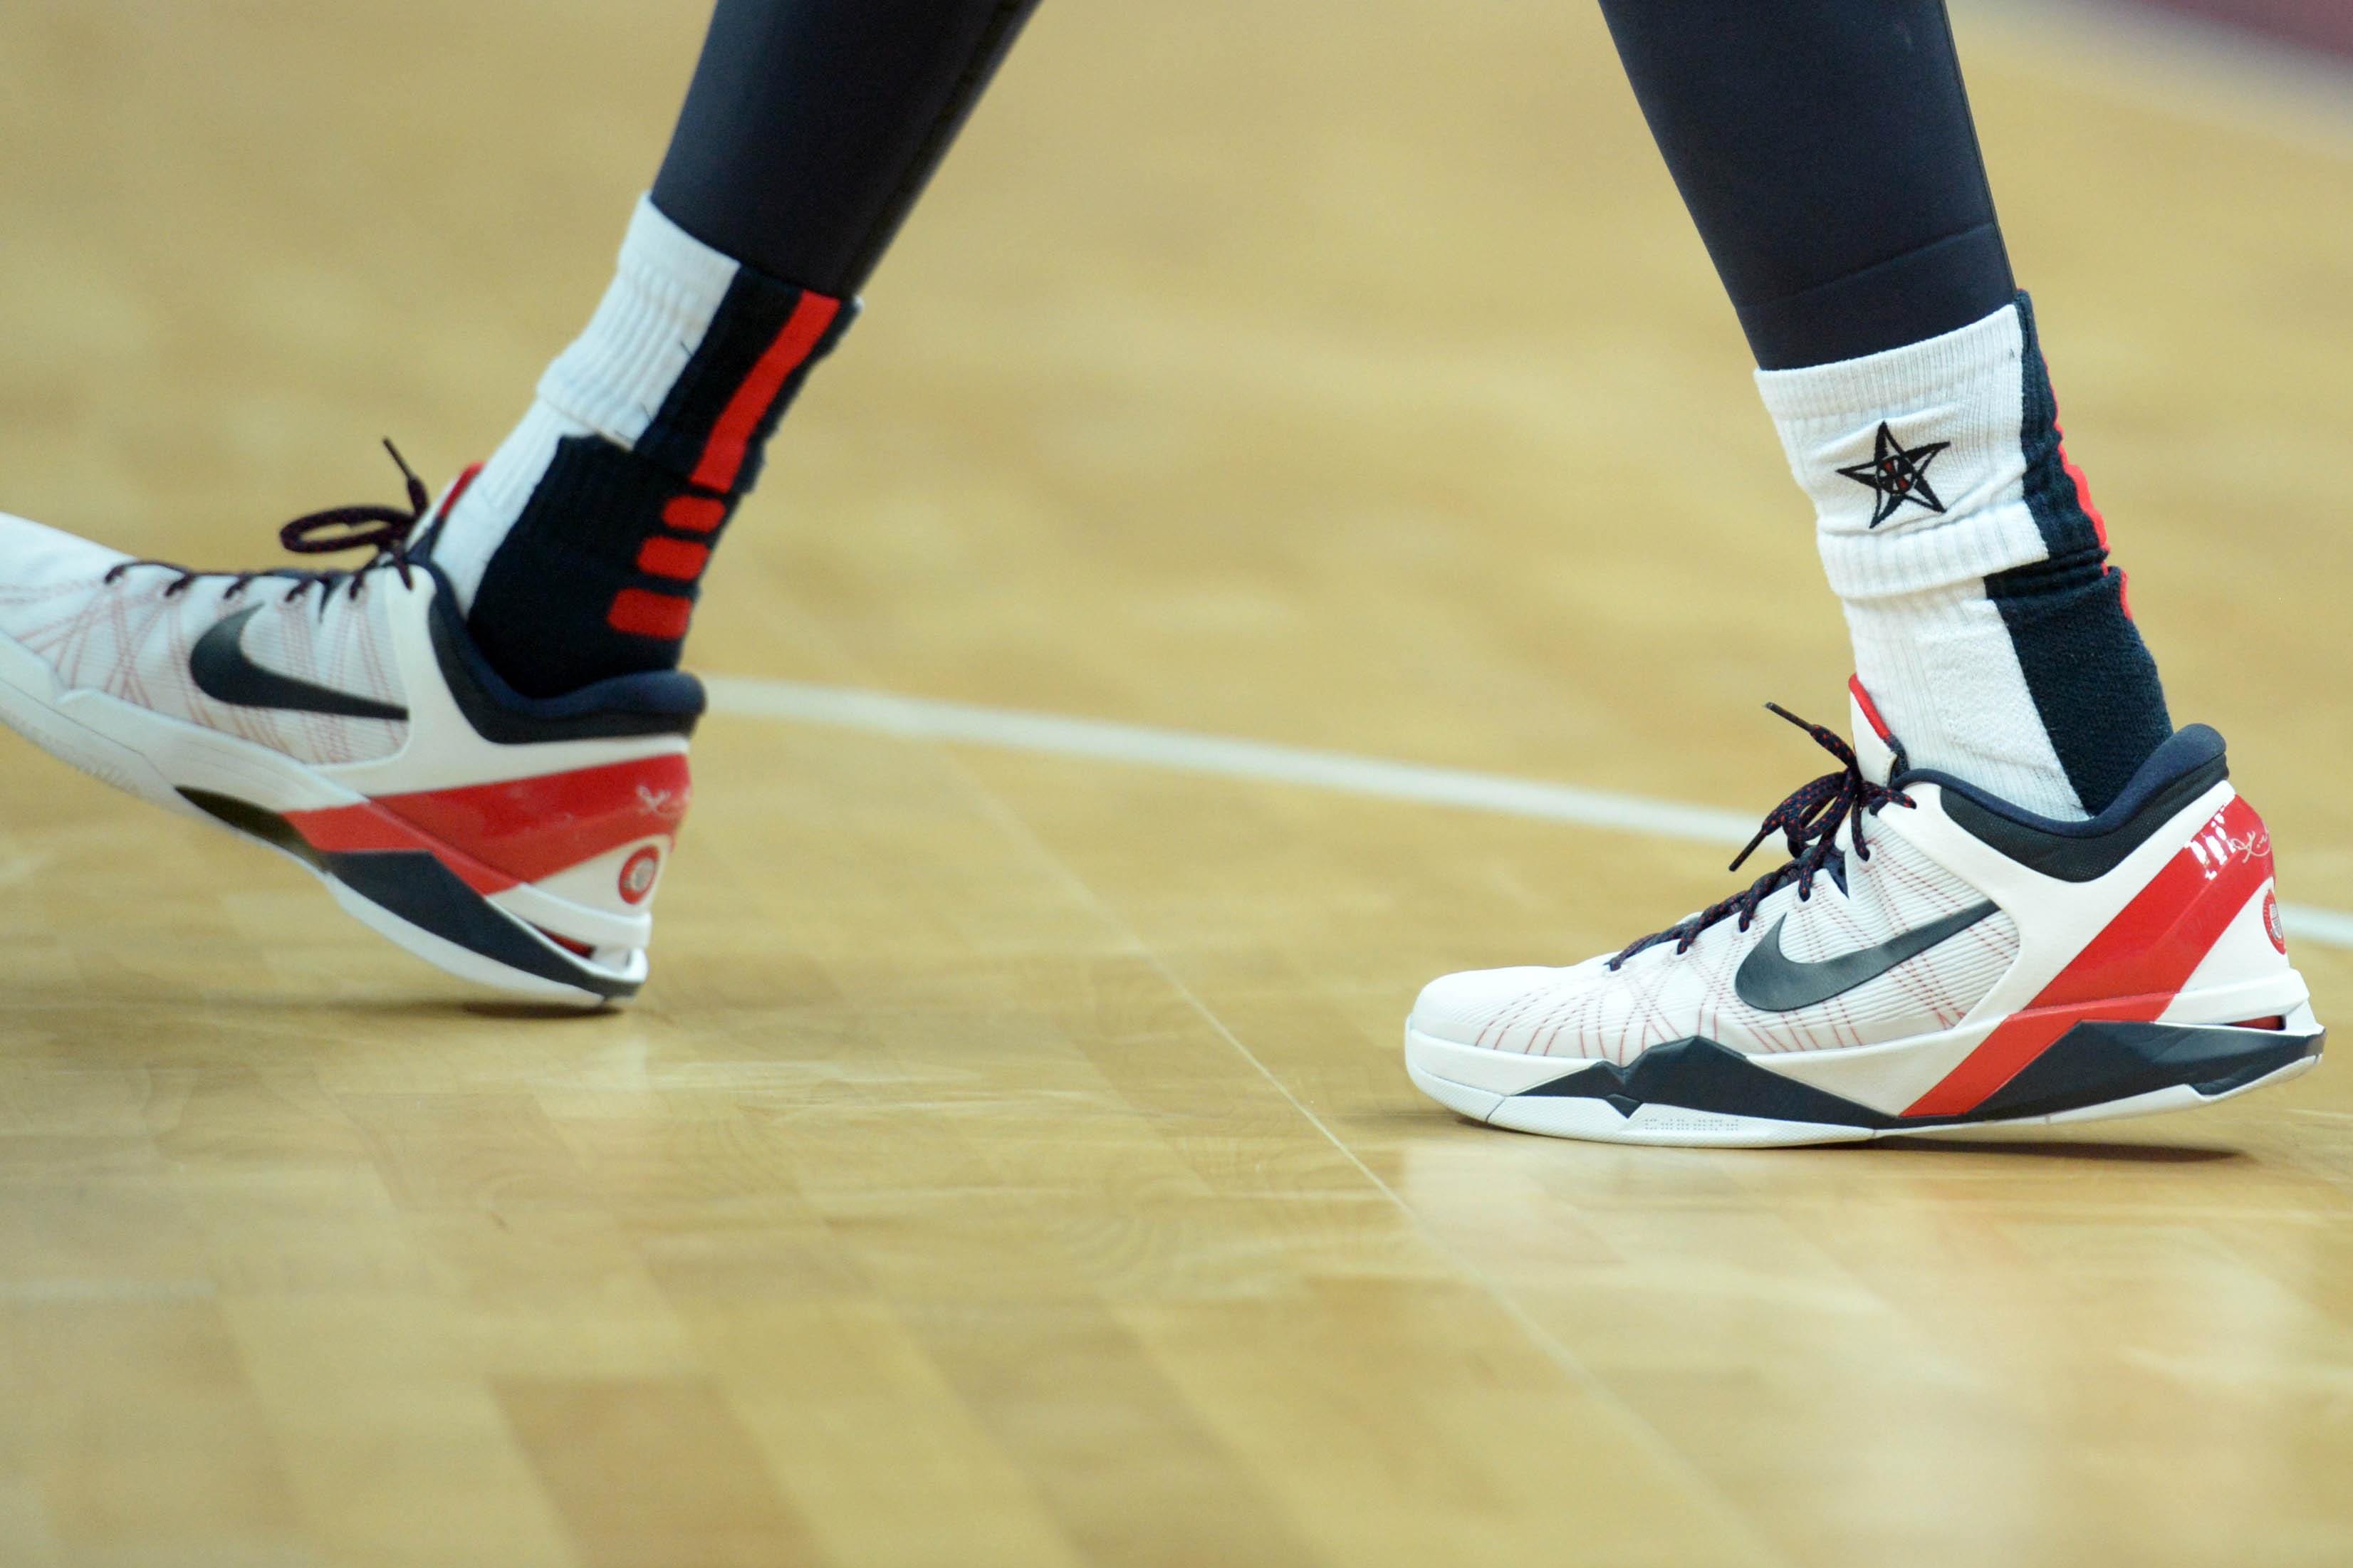 Kobe Bryant's white and navy sneakers worn during the 2012 Olympics.